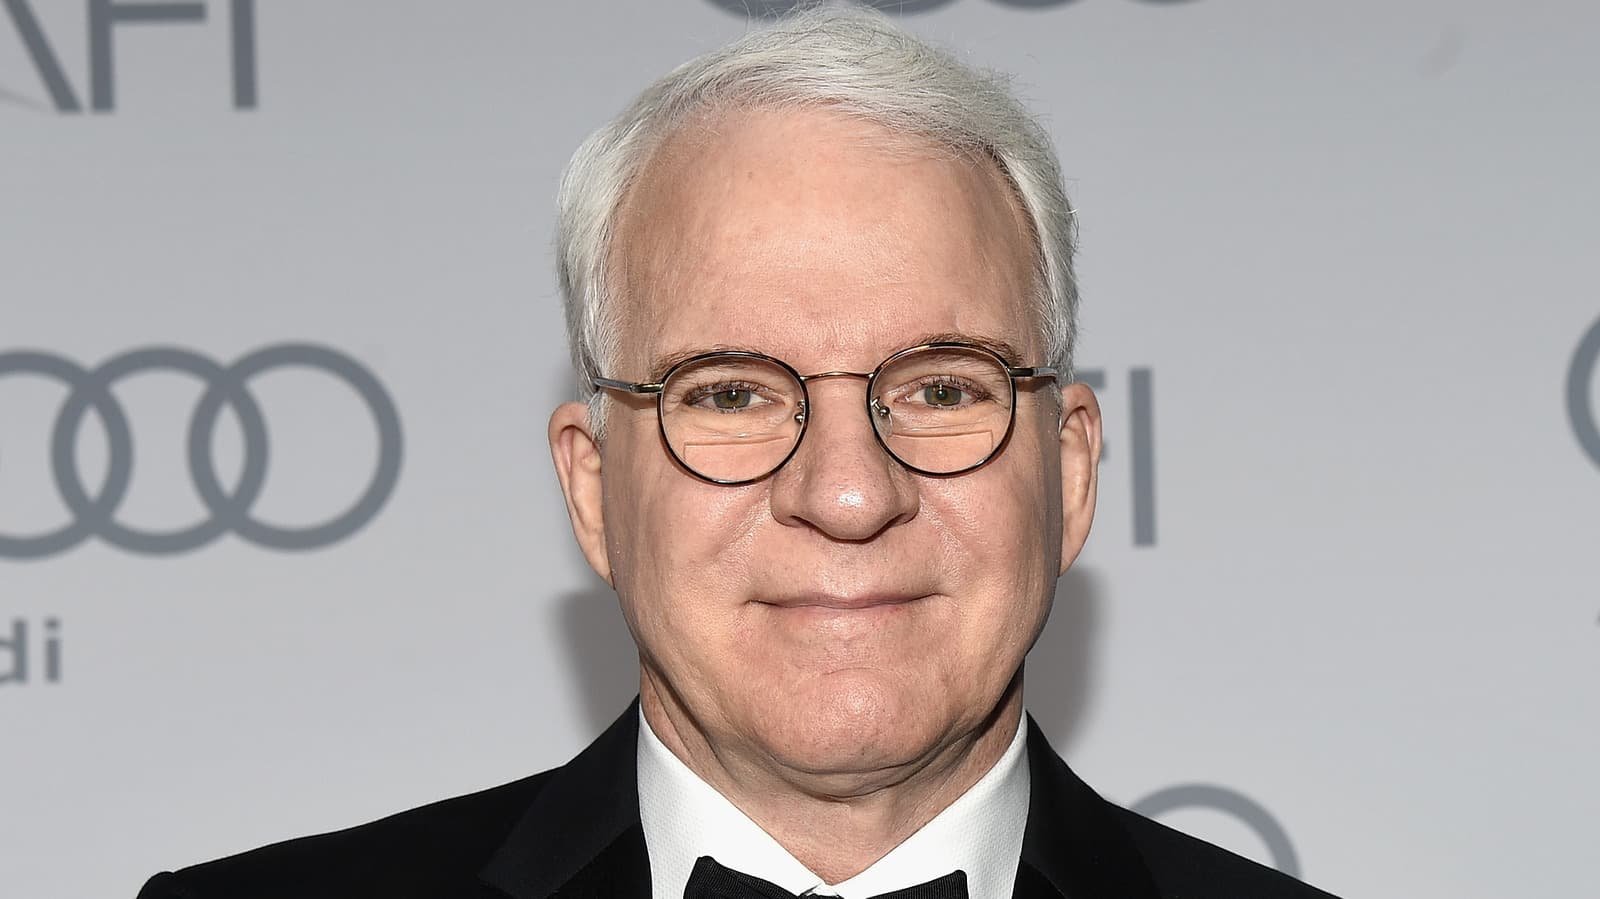 Only Murders in the Building Season 2 Cast - Steve Martin as Charles-Haden Savage